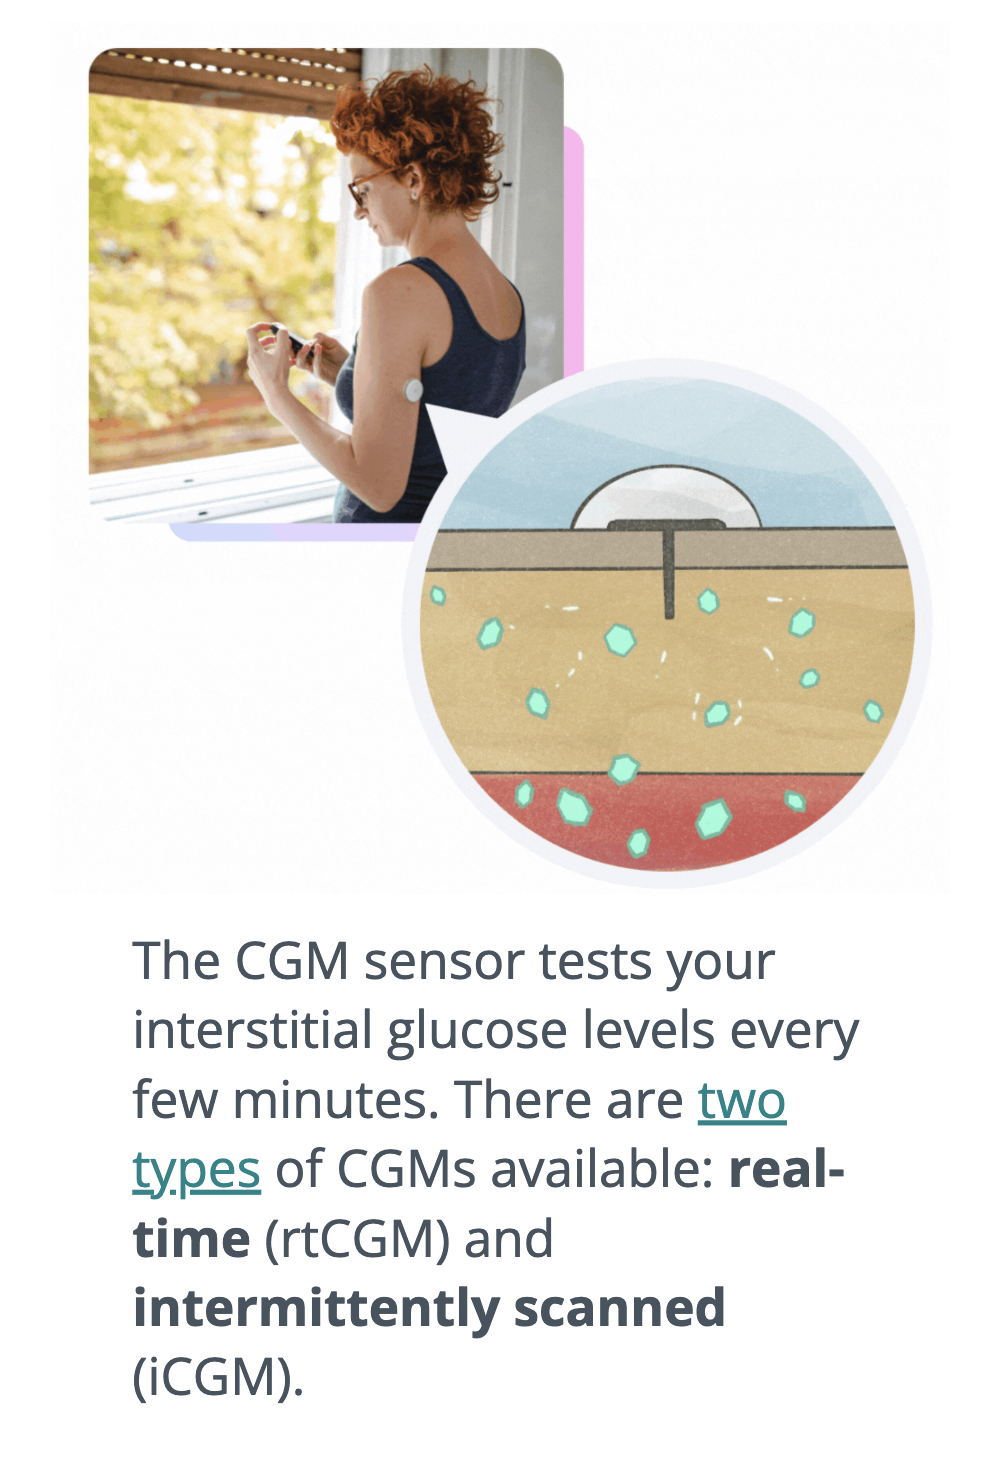 Screenshot from How to Use a CGM course